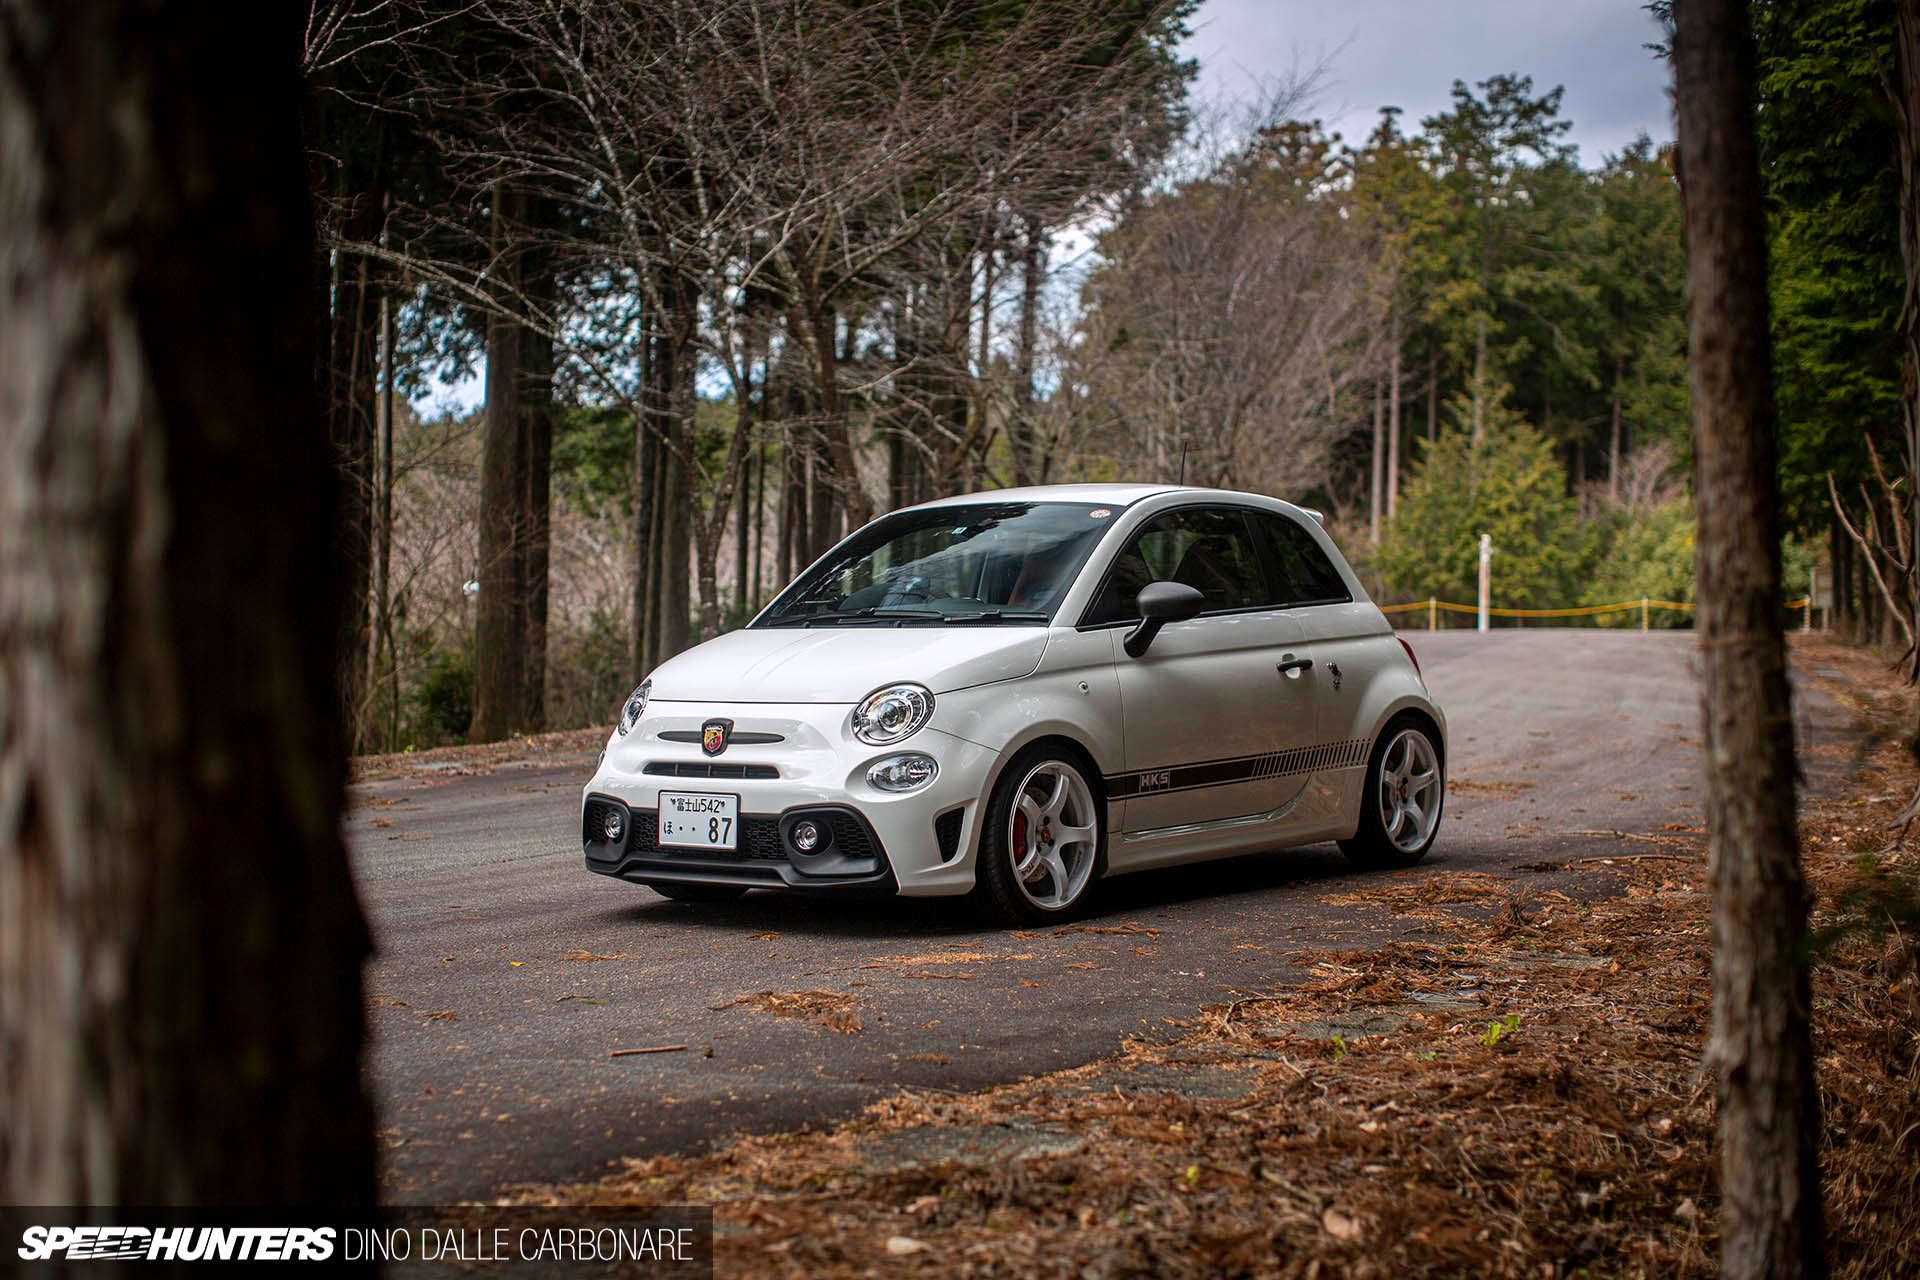 VIITS-Tuned Abarth 595: HKS For Euro Cars Starts Here - Speedhunters